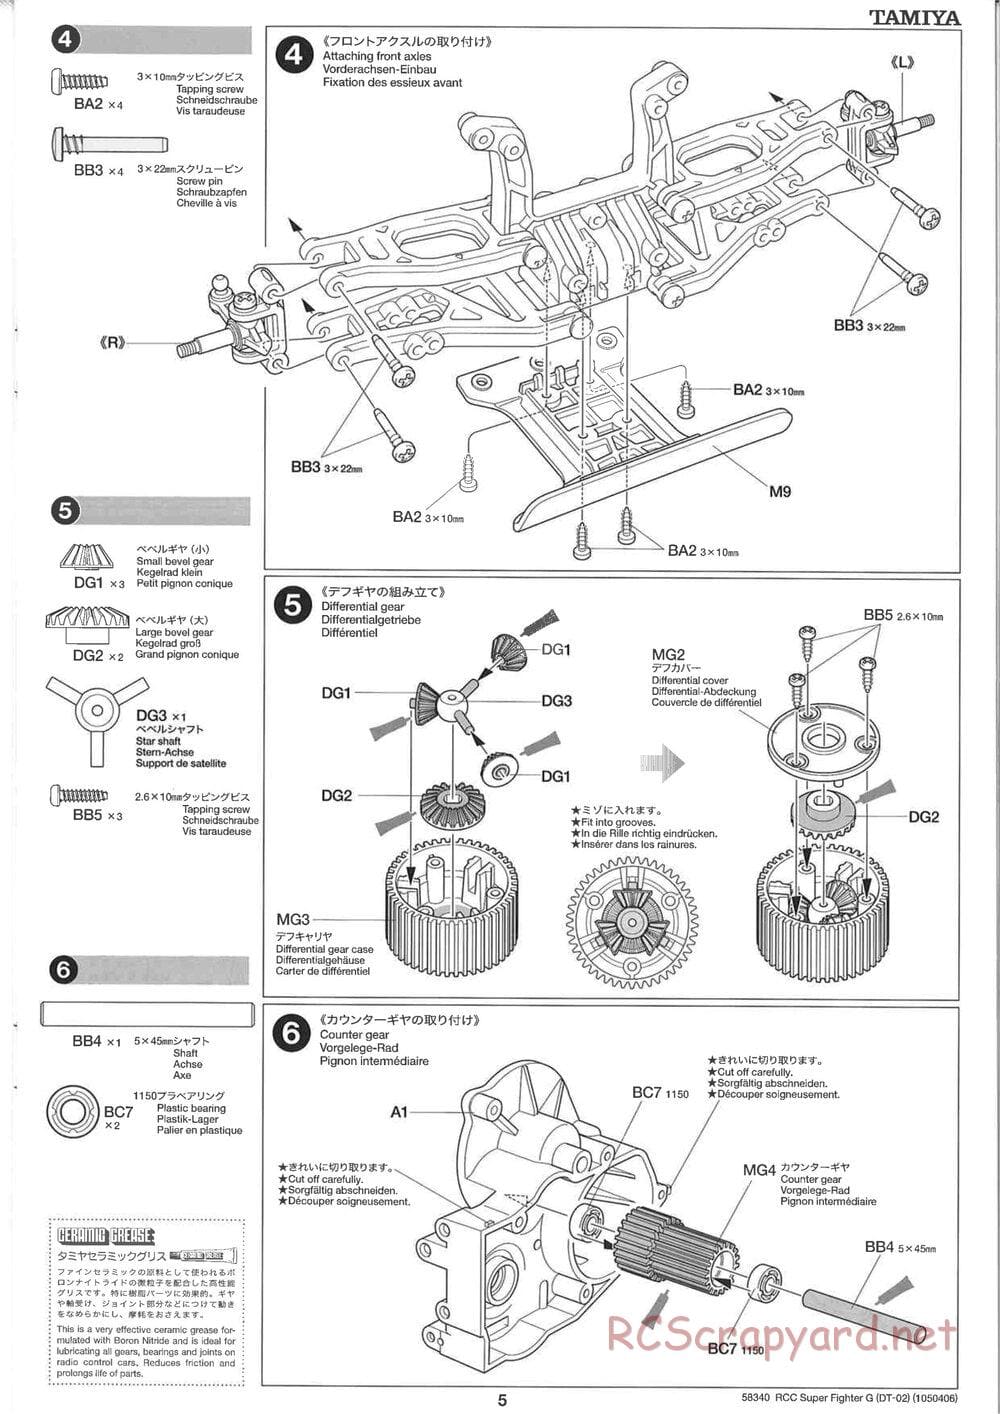 Tamiya - Super Fighter G Chassis - Manual - Page 5